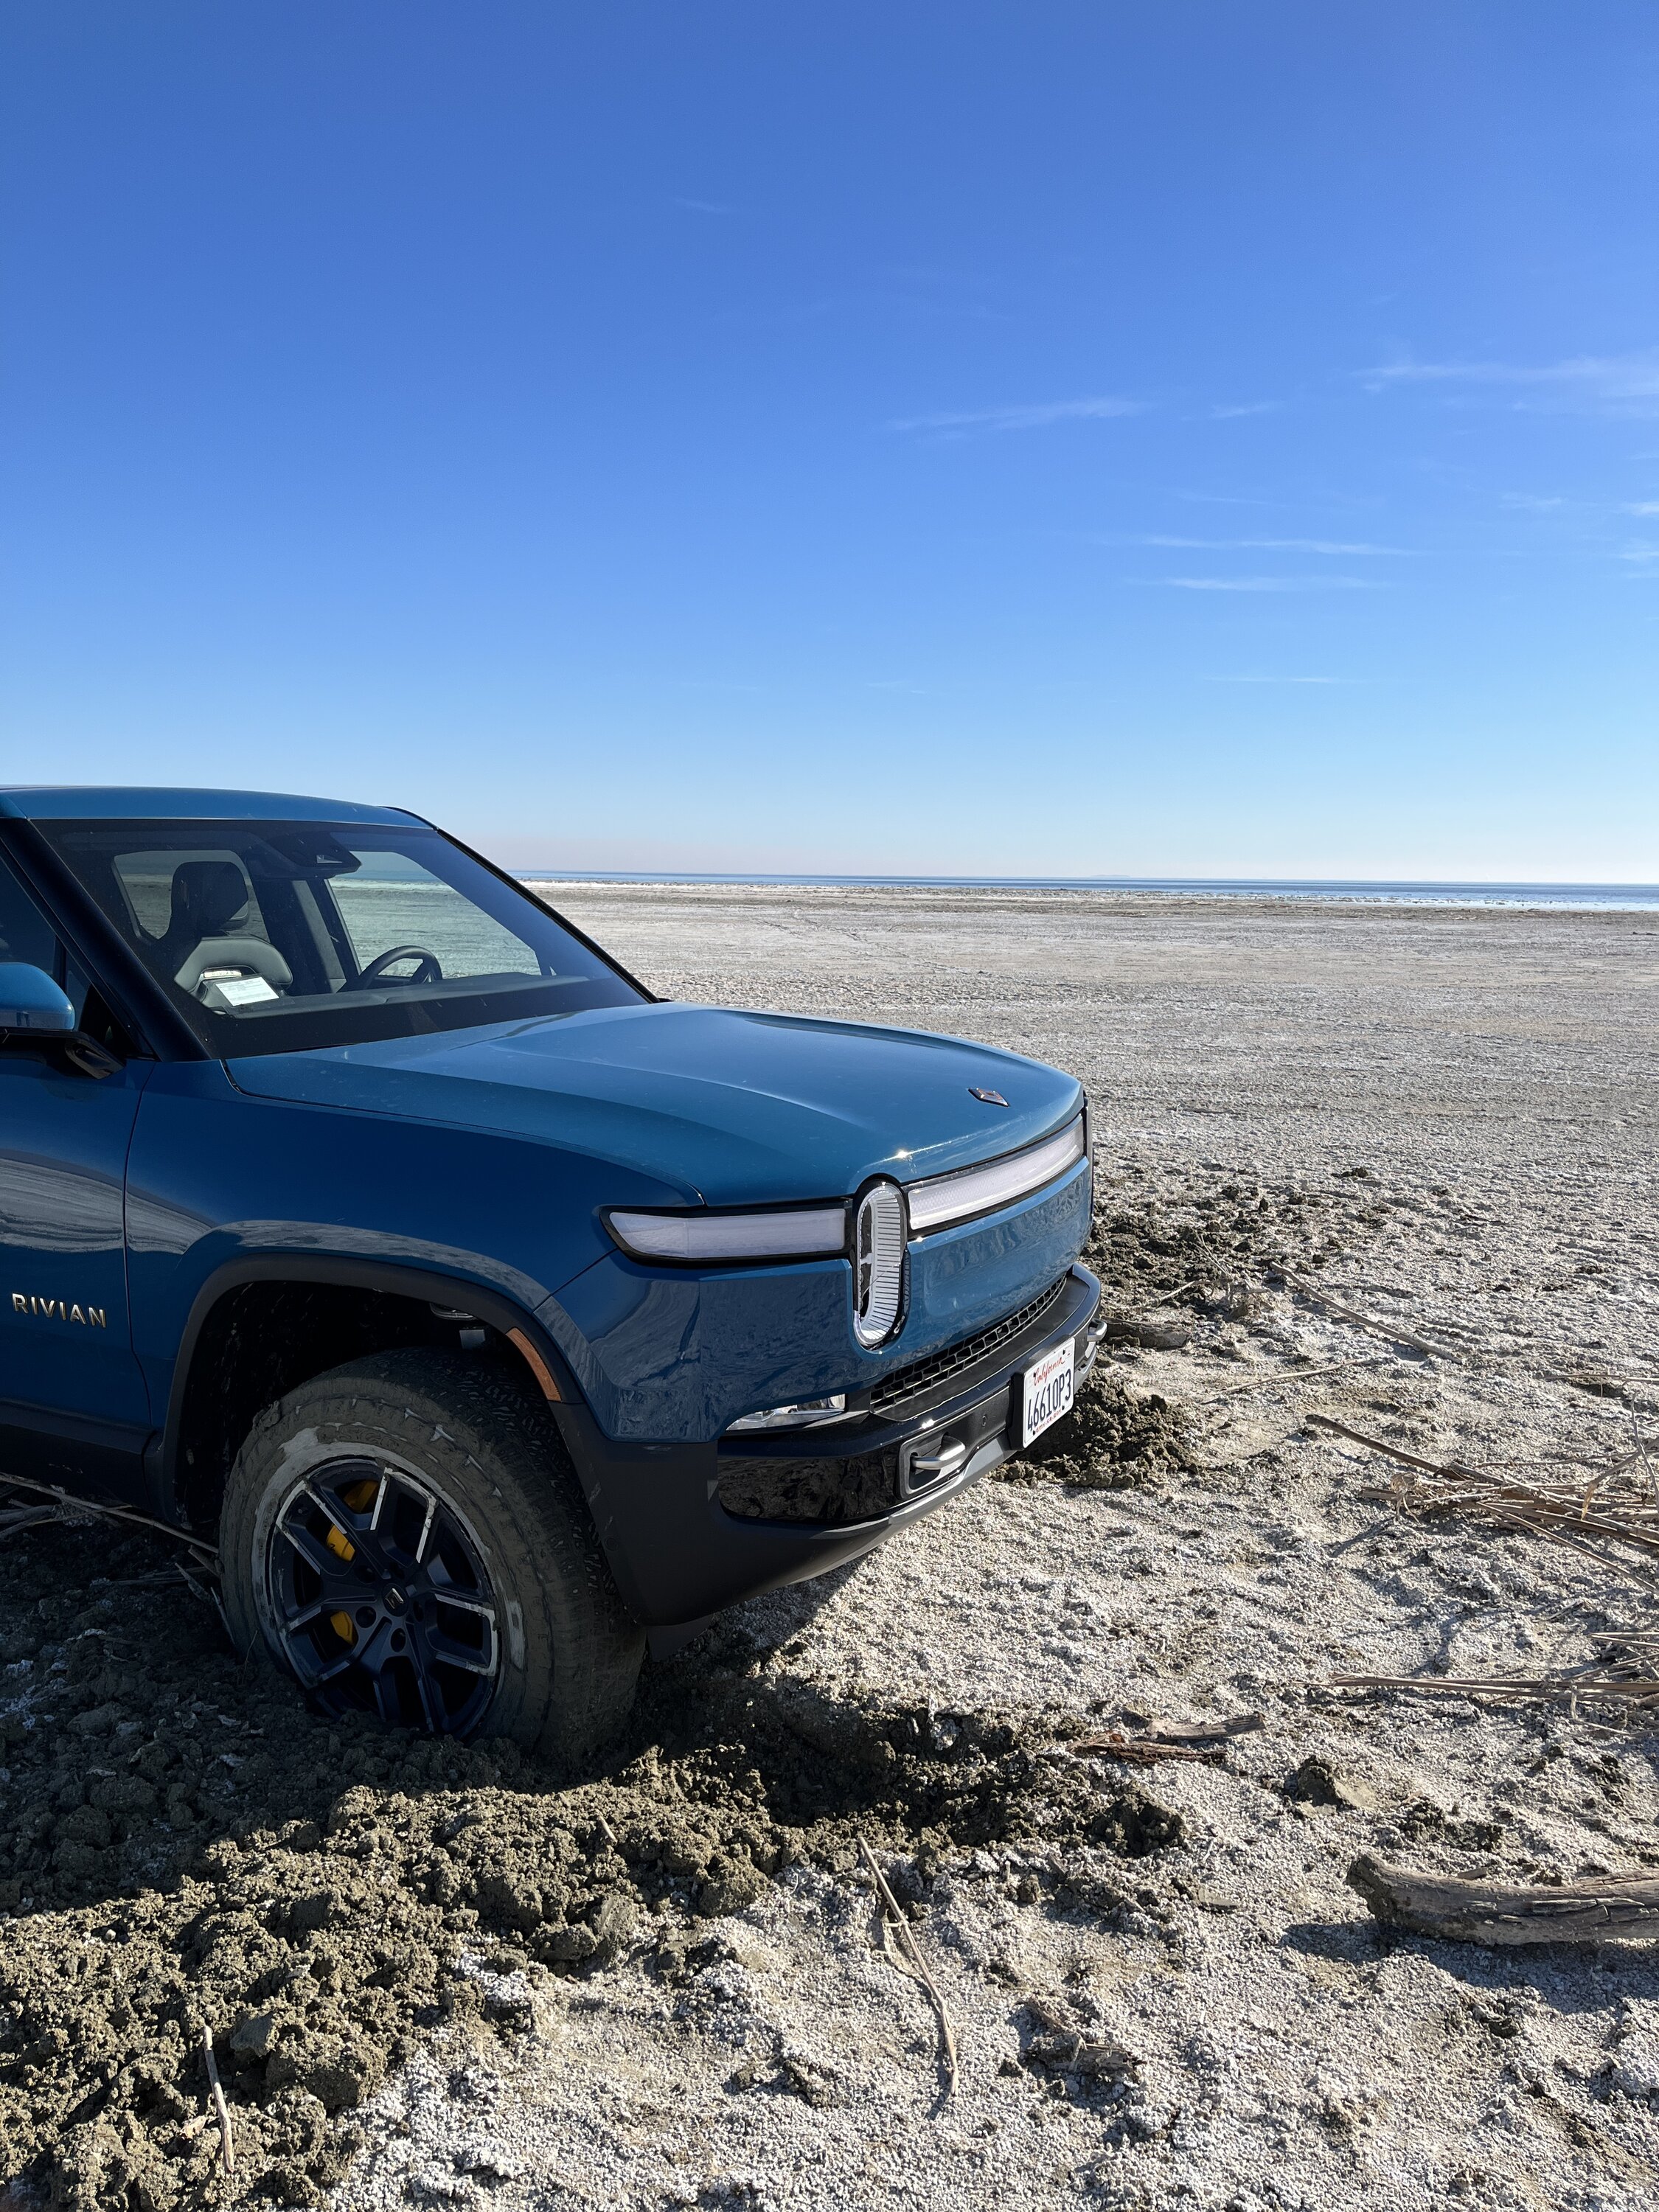 Rivian R1T R1S R1T recovery needed at Salton Sea (stuck in mud). PSA: have a recovery plan when off-roading 2C39D358-ACF9-49F1-B92D-03D81D4985D8.JPG